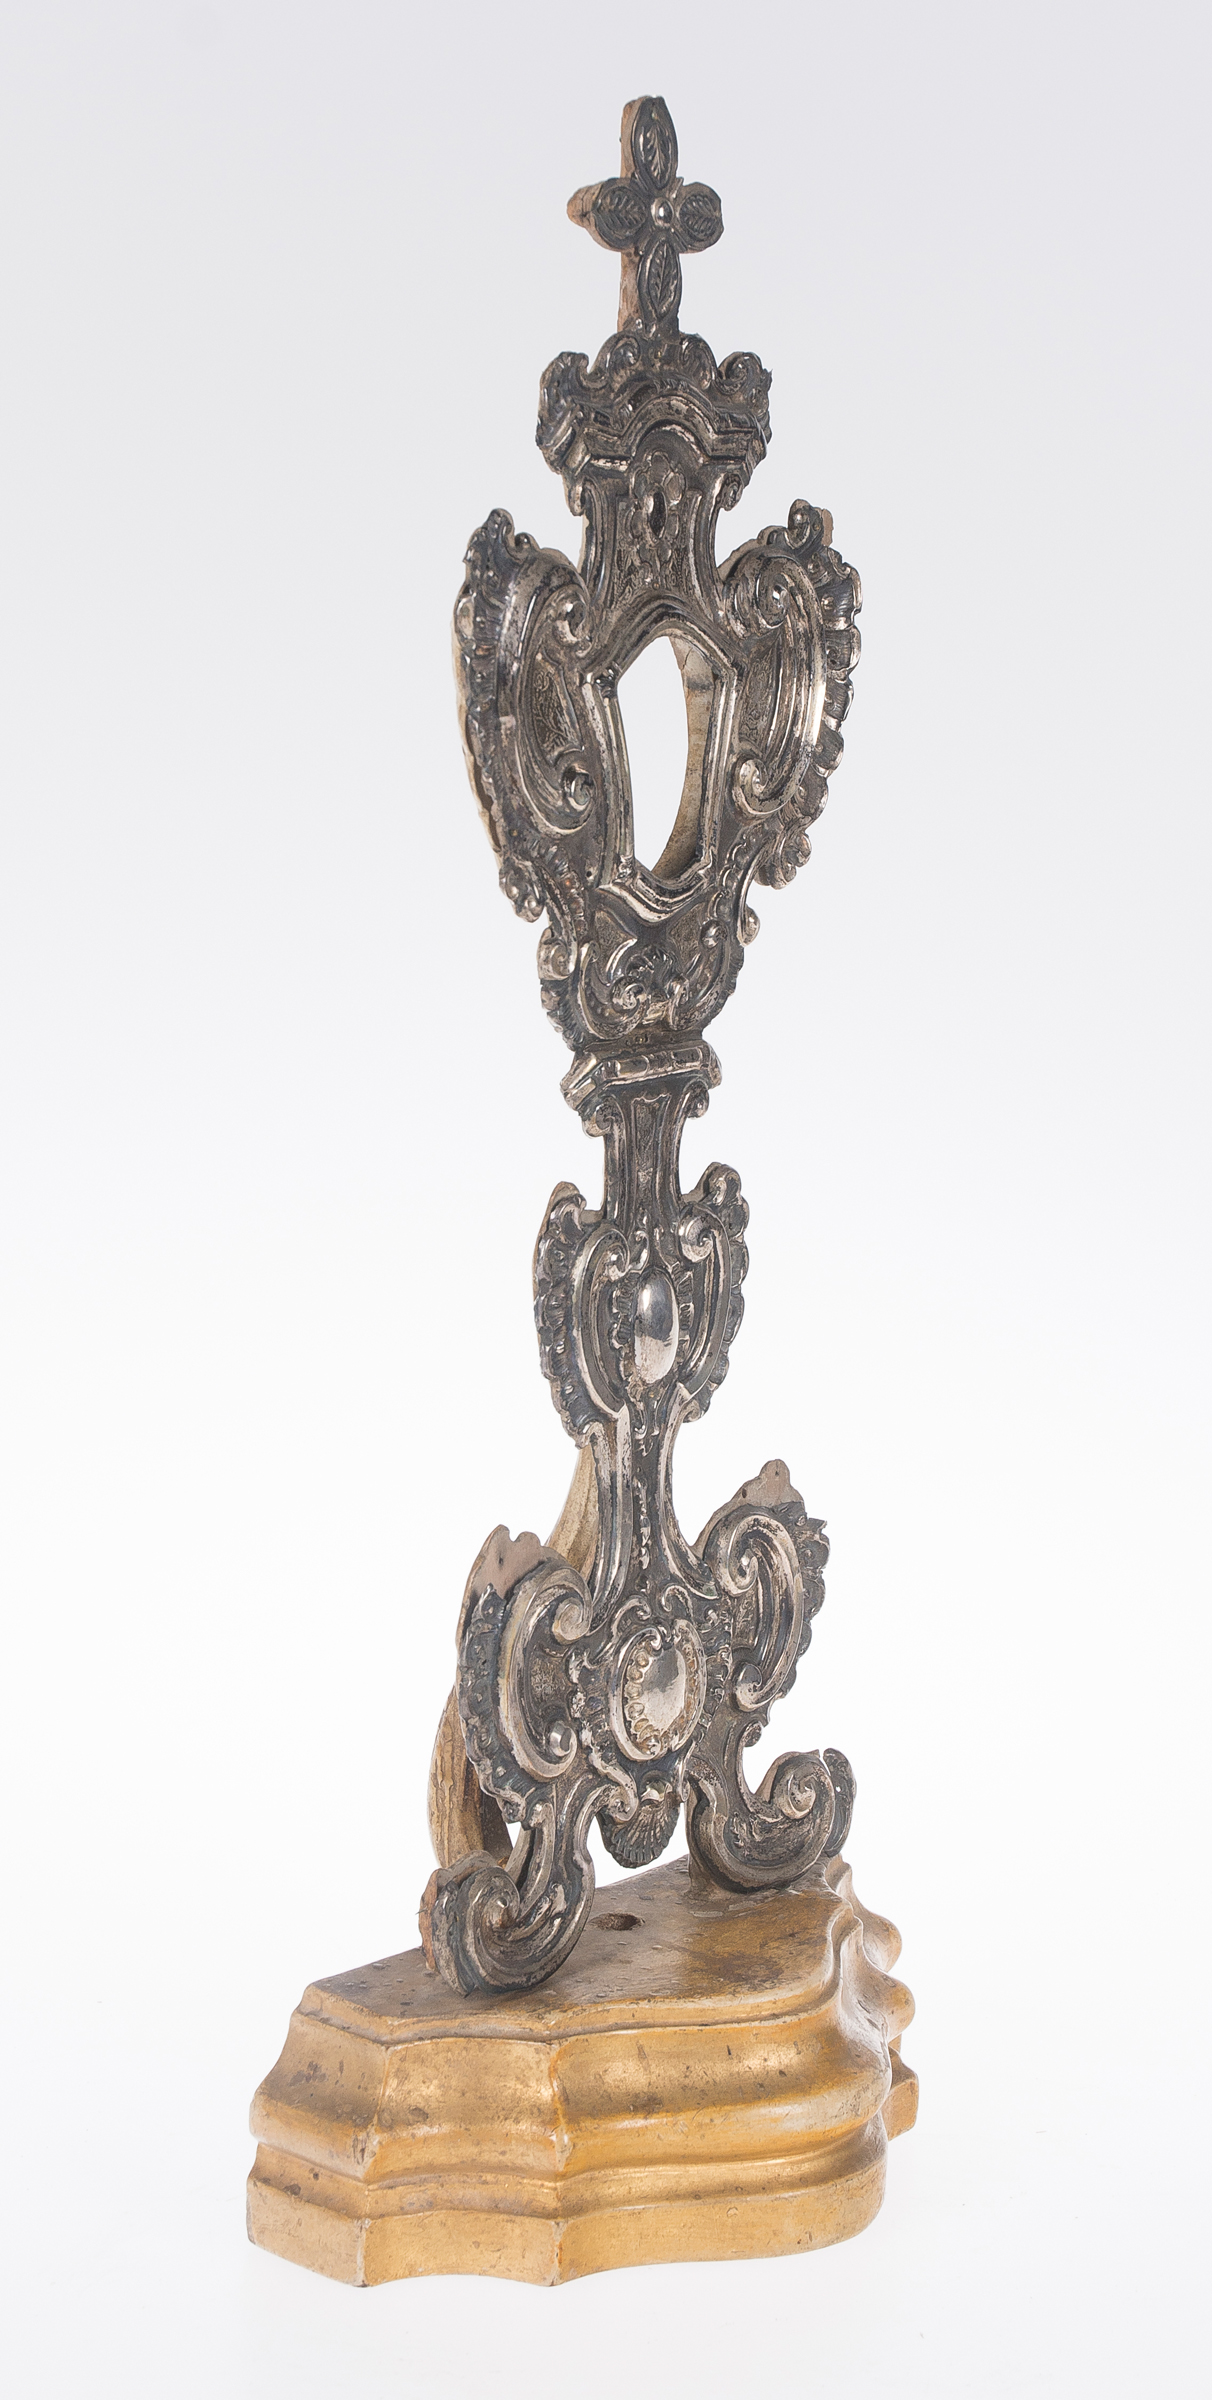 Wooden reliquary covered in embossed and chased silver. Italy. 17th - 18th century. - Image 2 of 4